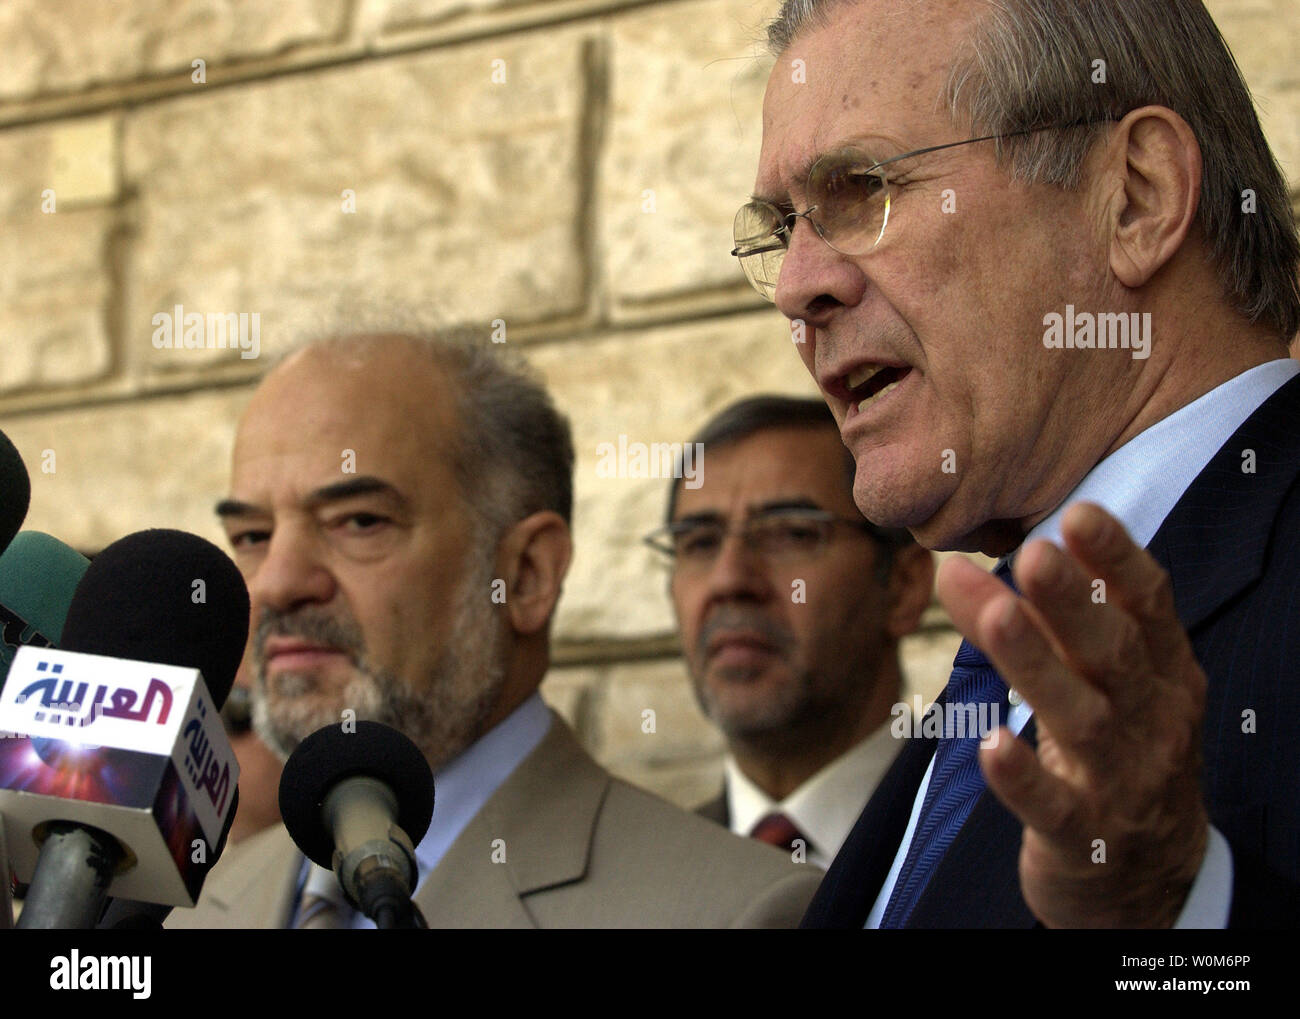 Secretary of Defense Donald H. Rumsfeld (right) and Iraqi Prime Minister Ibrahim Jafari (left) take questions from the press after their meeting at Jafari's residence in Baghdad, Iraq, on April 12, 2005.  Rumsfeld is in Iraq to visit with U.S. and coalition forces and to meet with the newly elected members of the Iraqi government.   (UPI Photo/ Cherie A. Thurlby/Air Force) Stock Photo